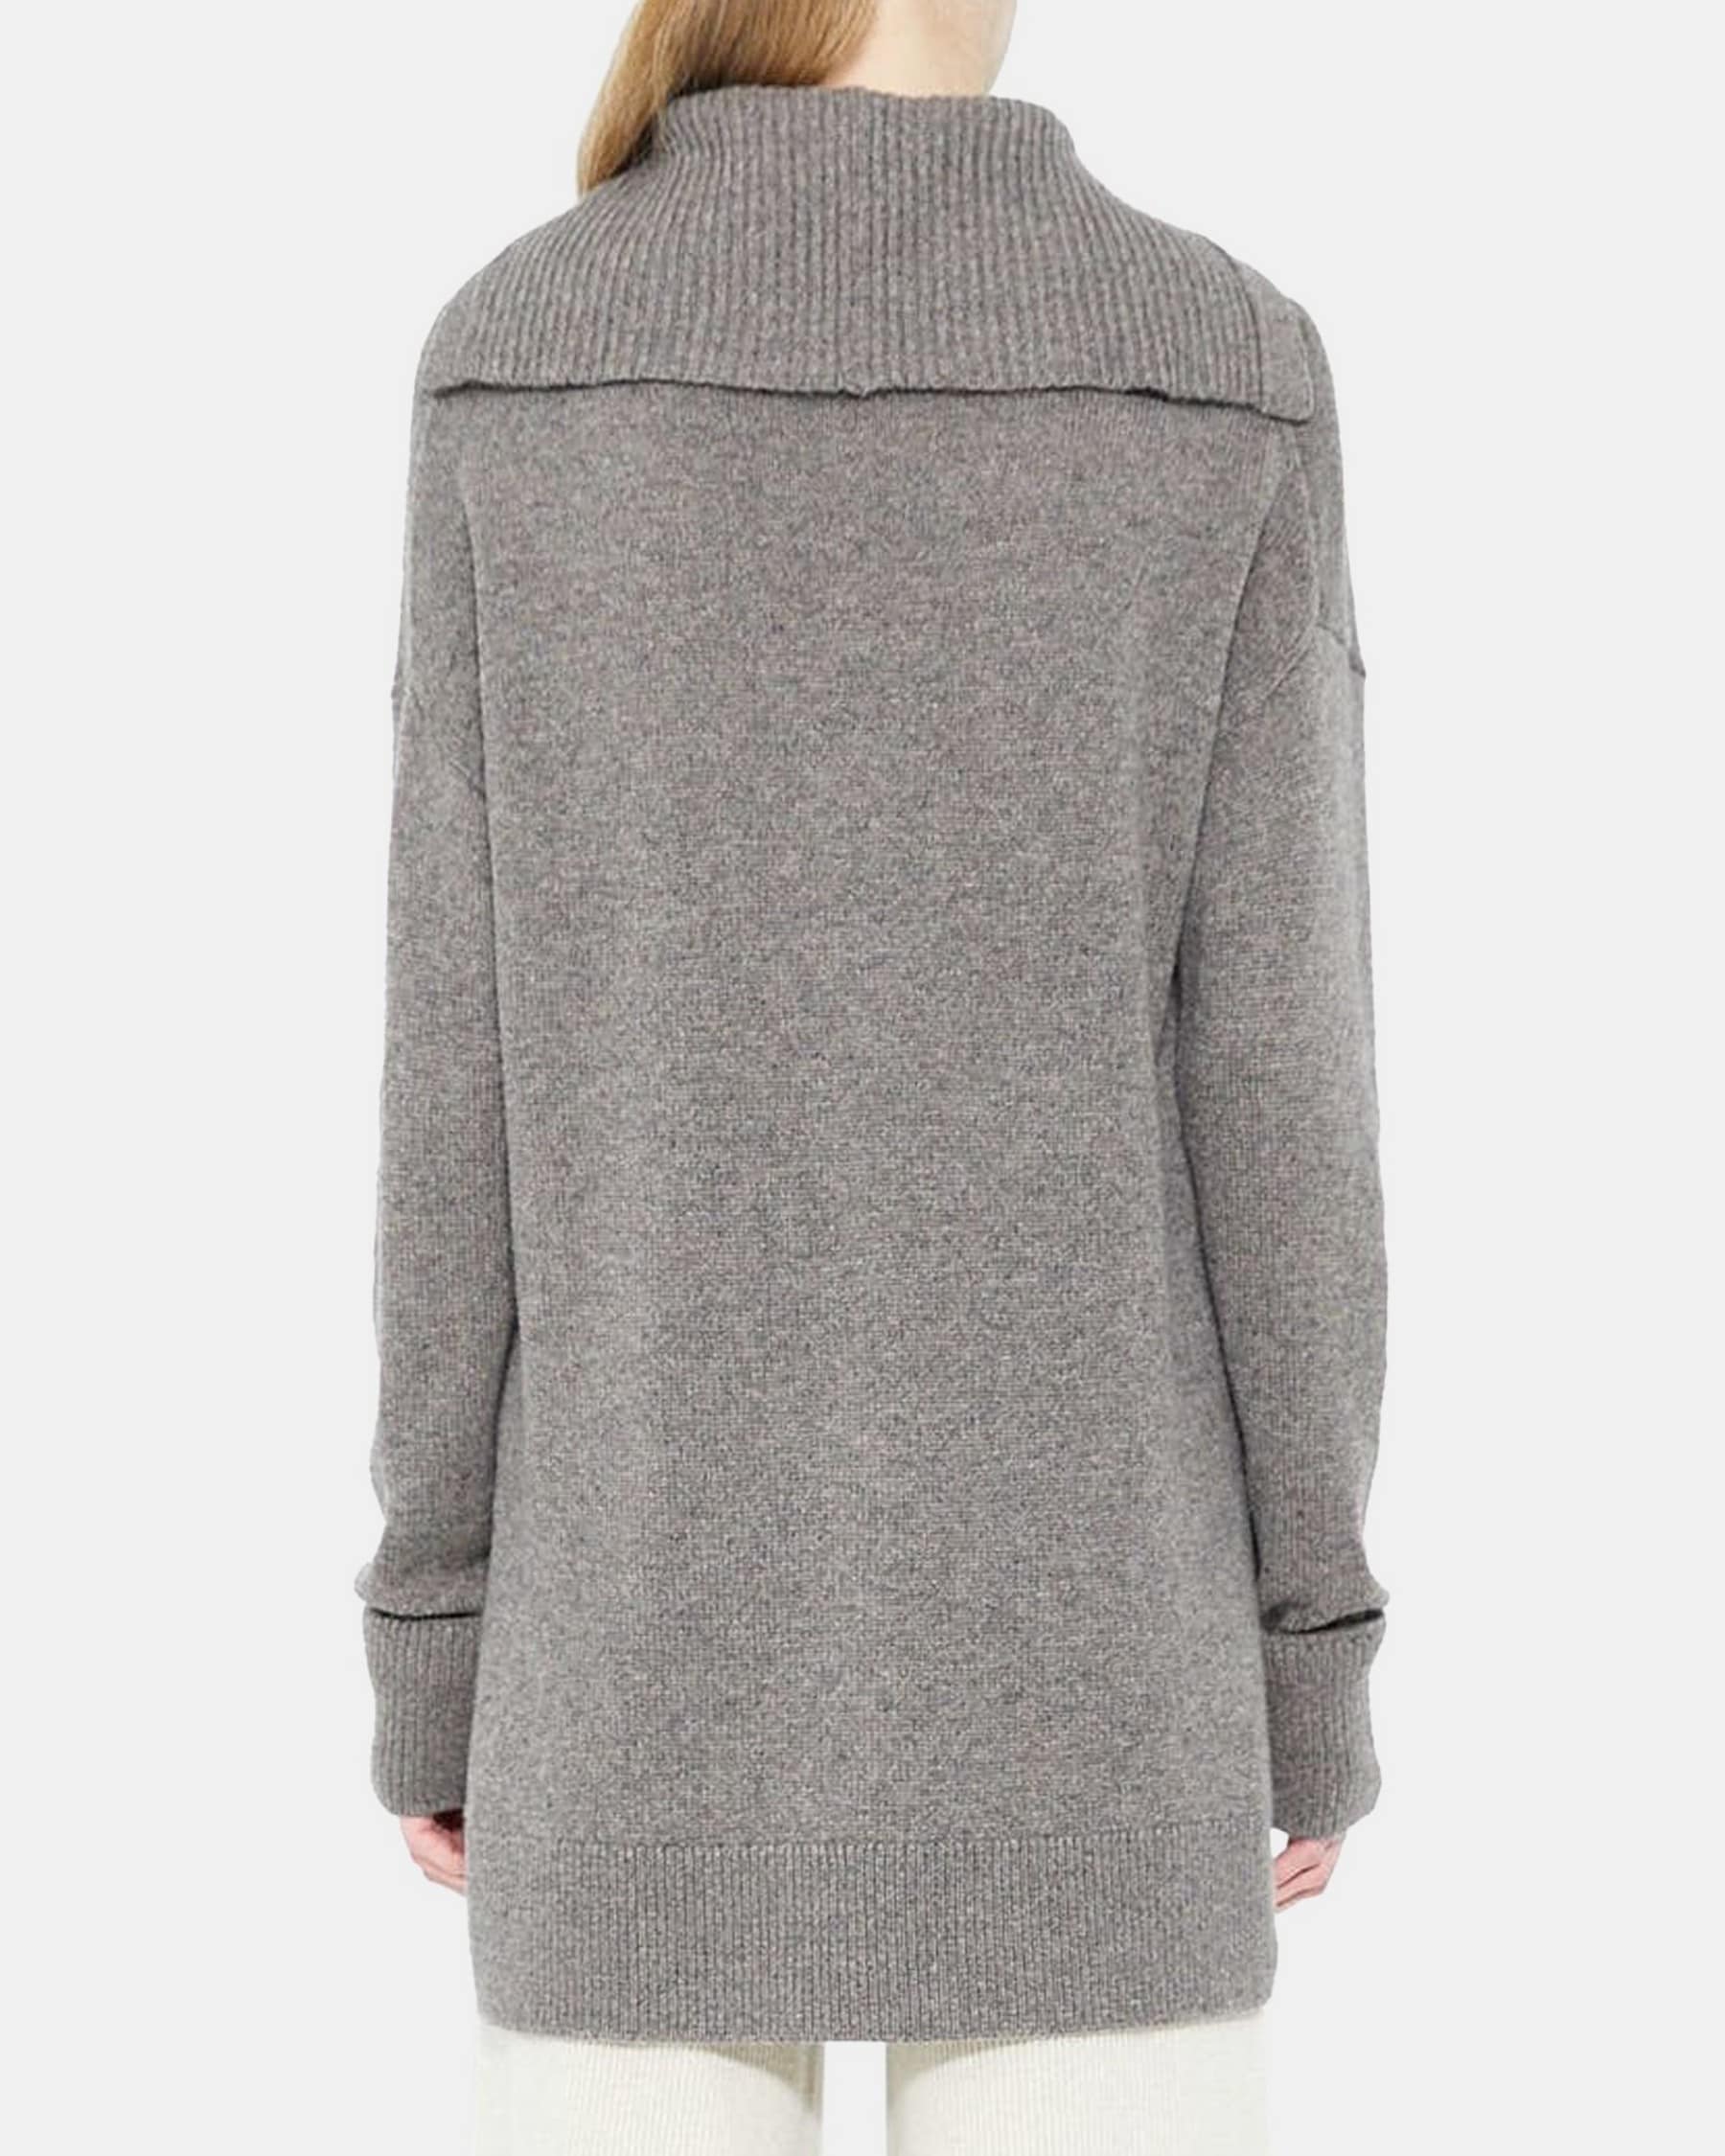 Button Turtleneck Sweater in Cashmere